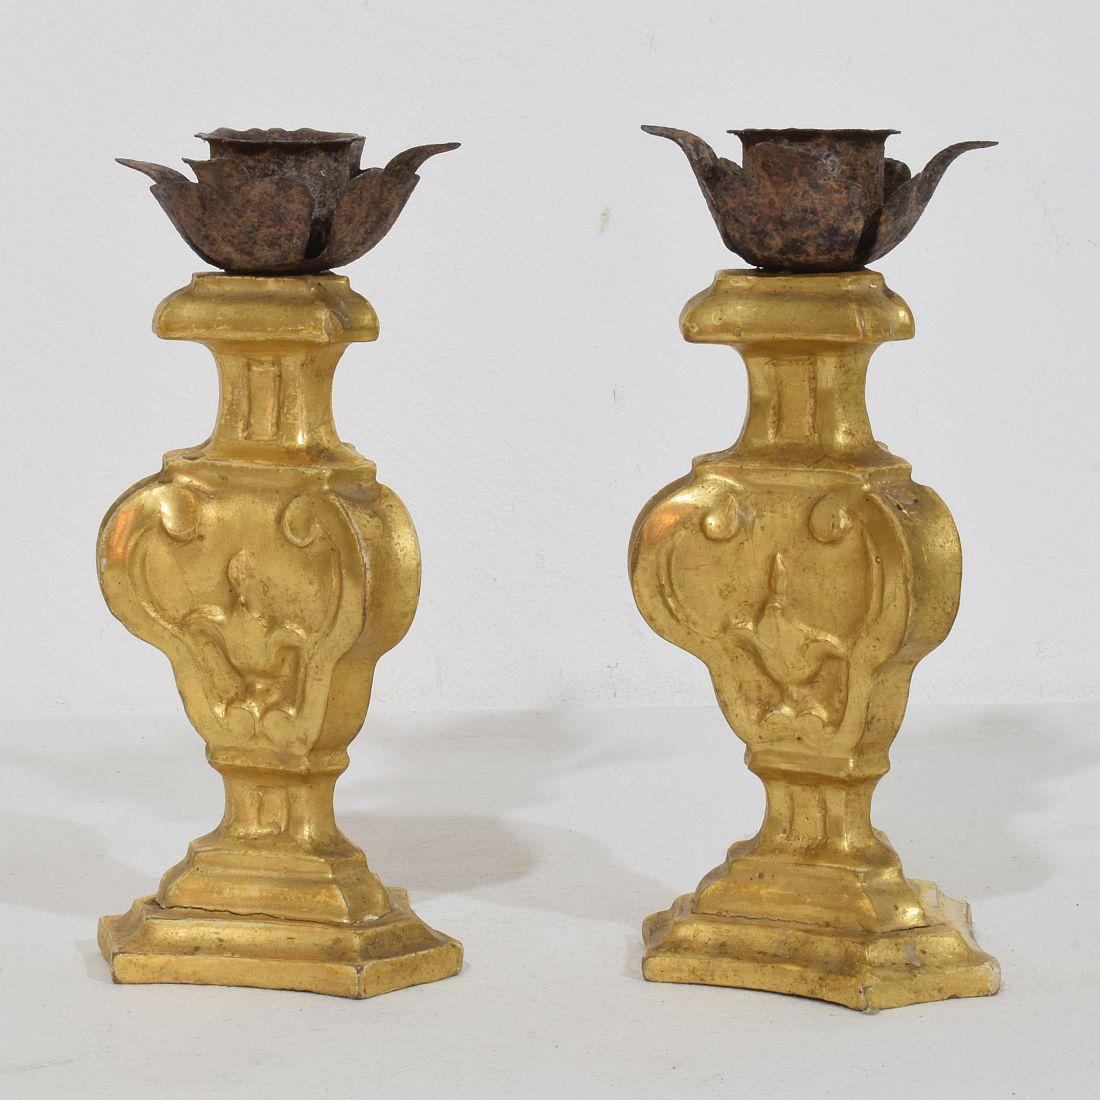 Couple of Small Late 18th Century Italian Neoclassical Giltwood Candleholders In Good Condition For Sale In Buisson, FR